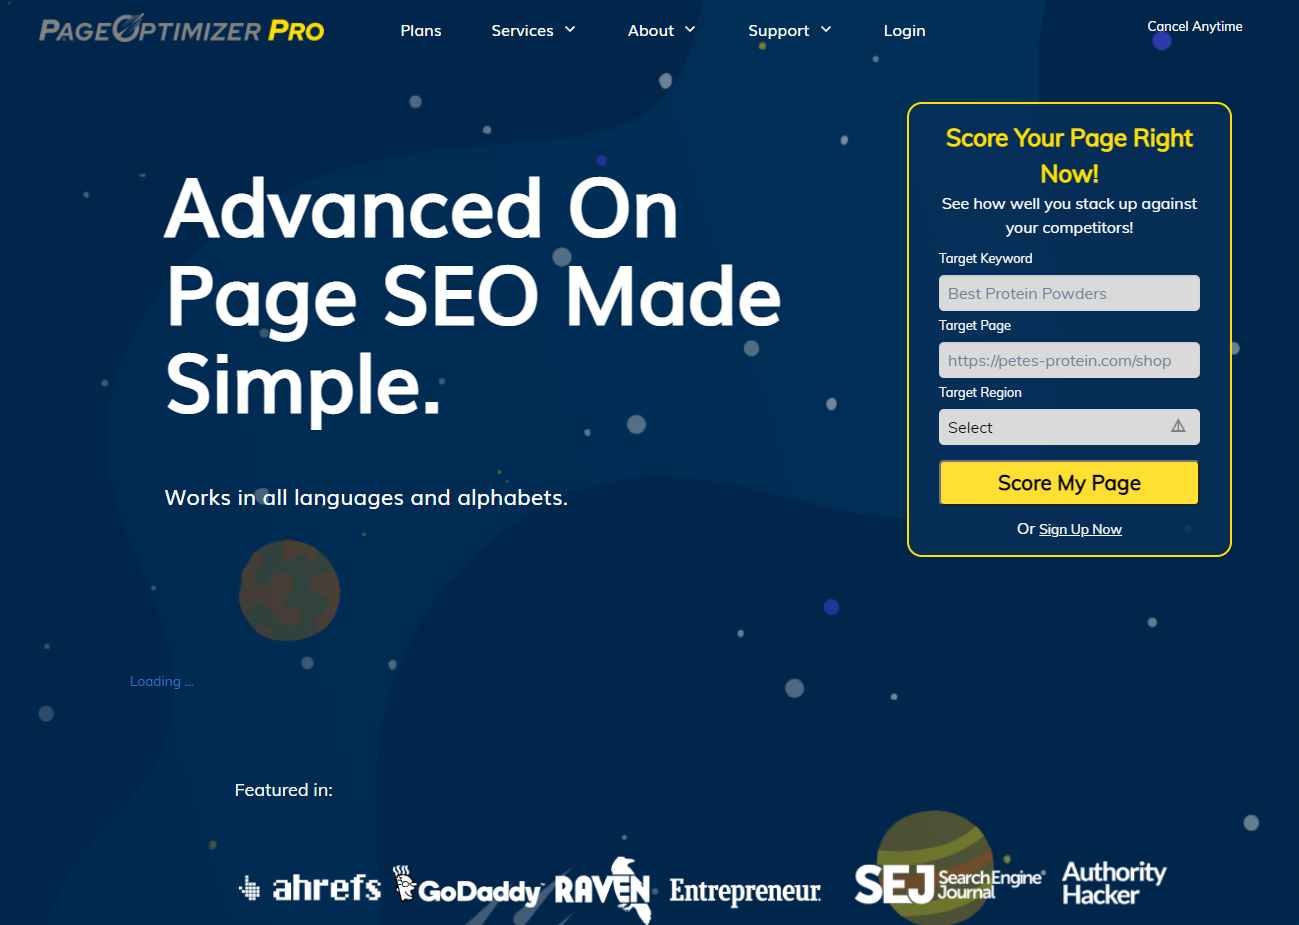 A tool that helps increase your on page SEO (Page Optimizer Pro)